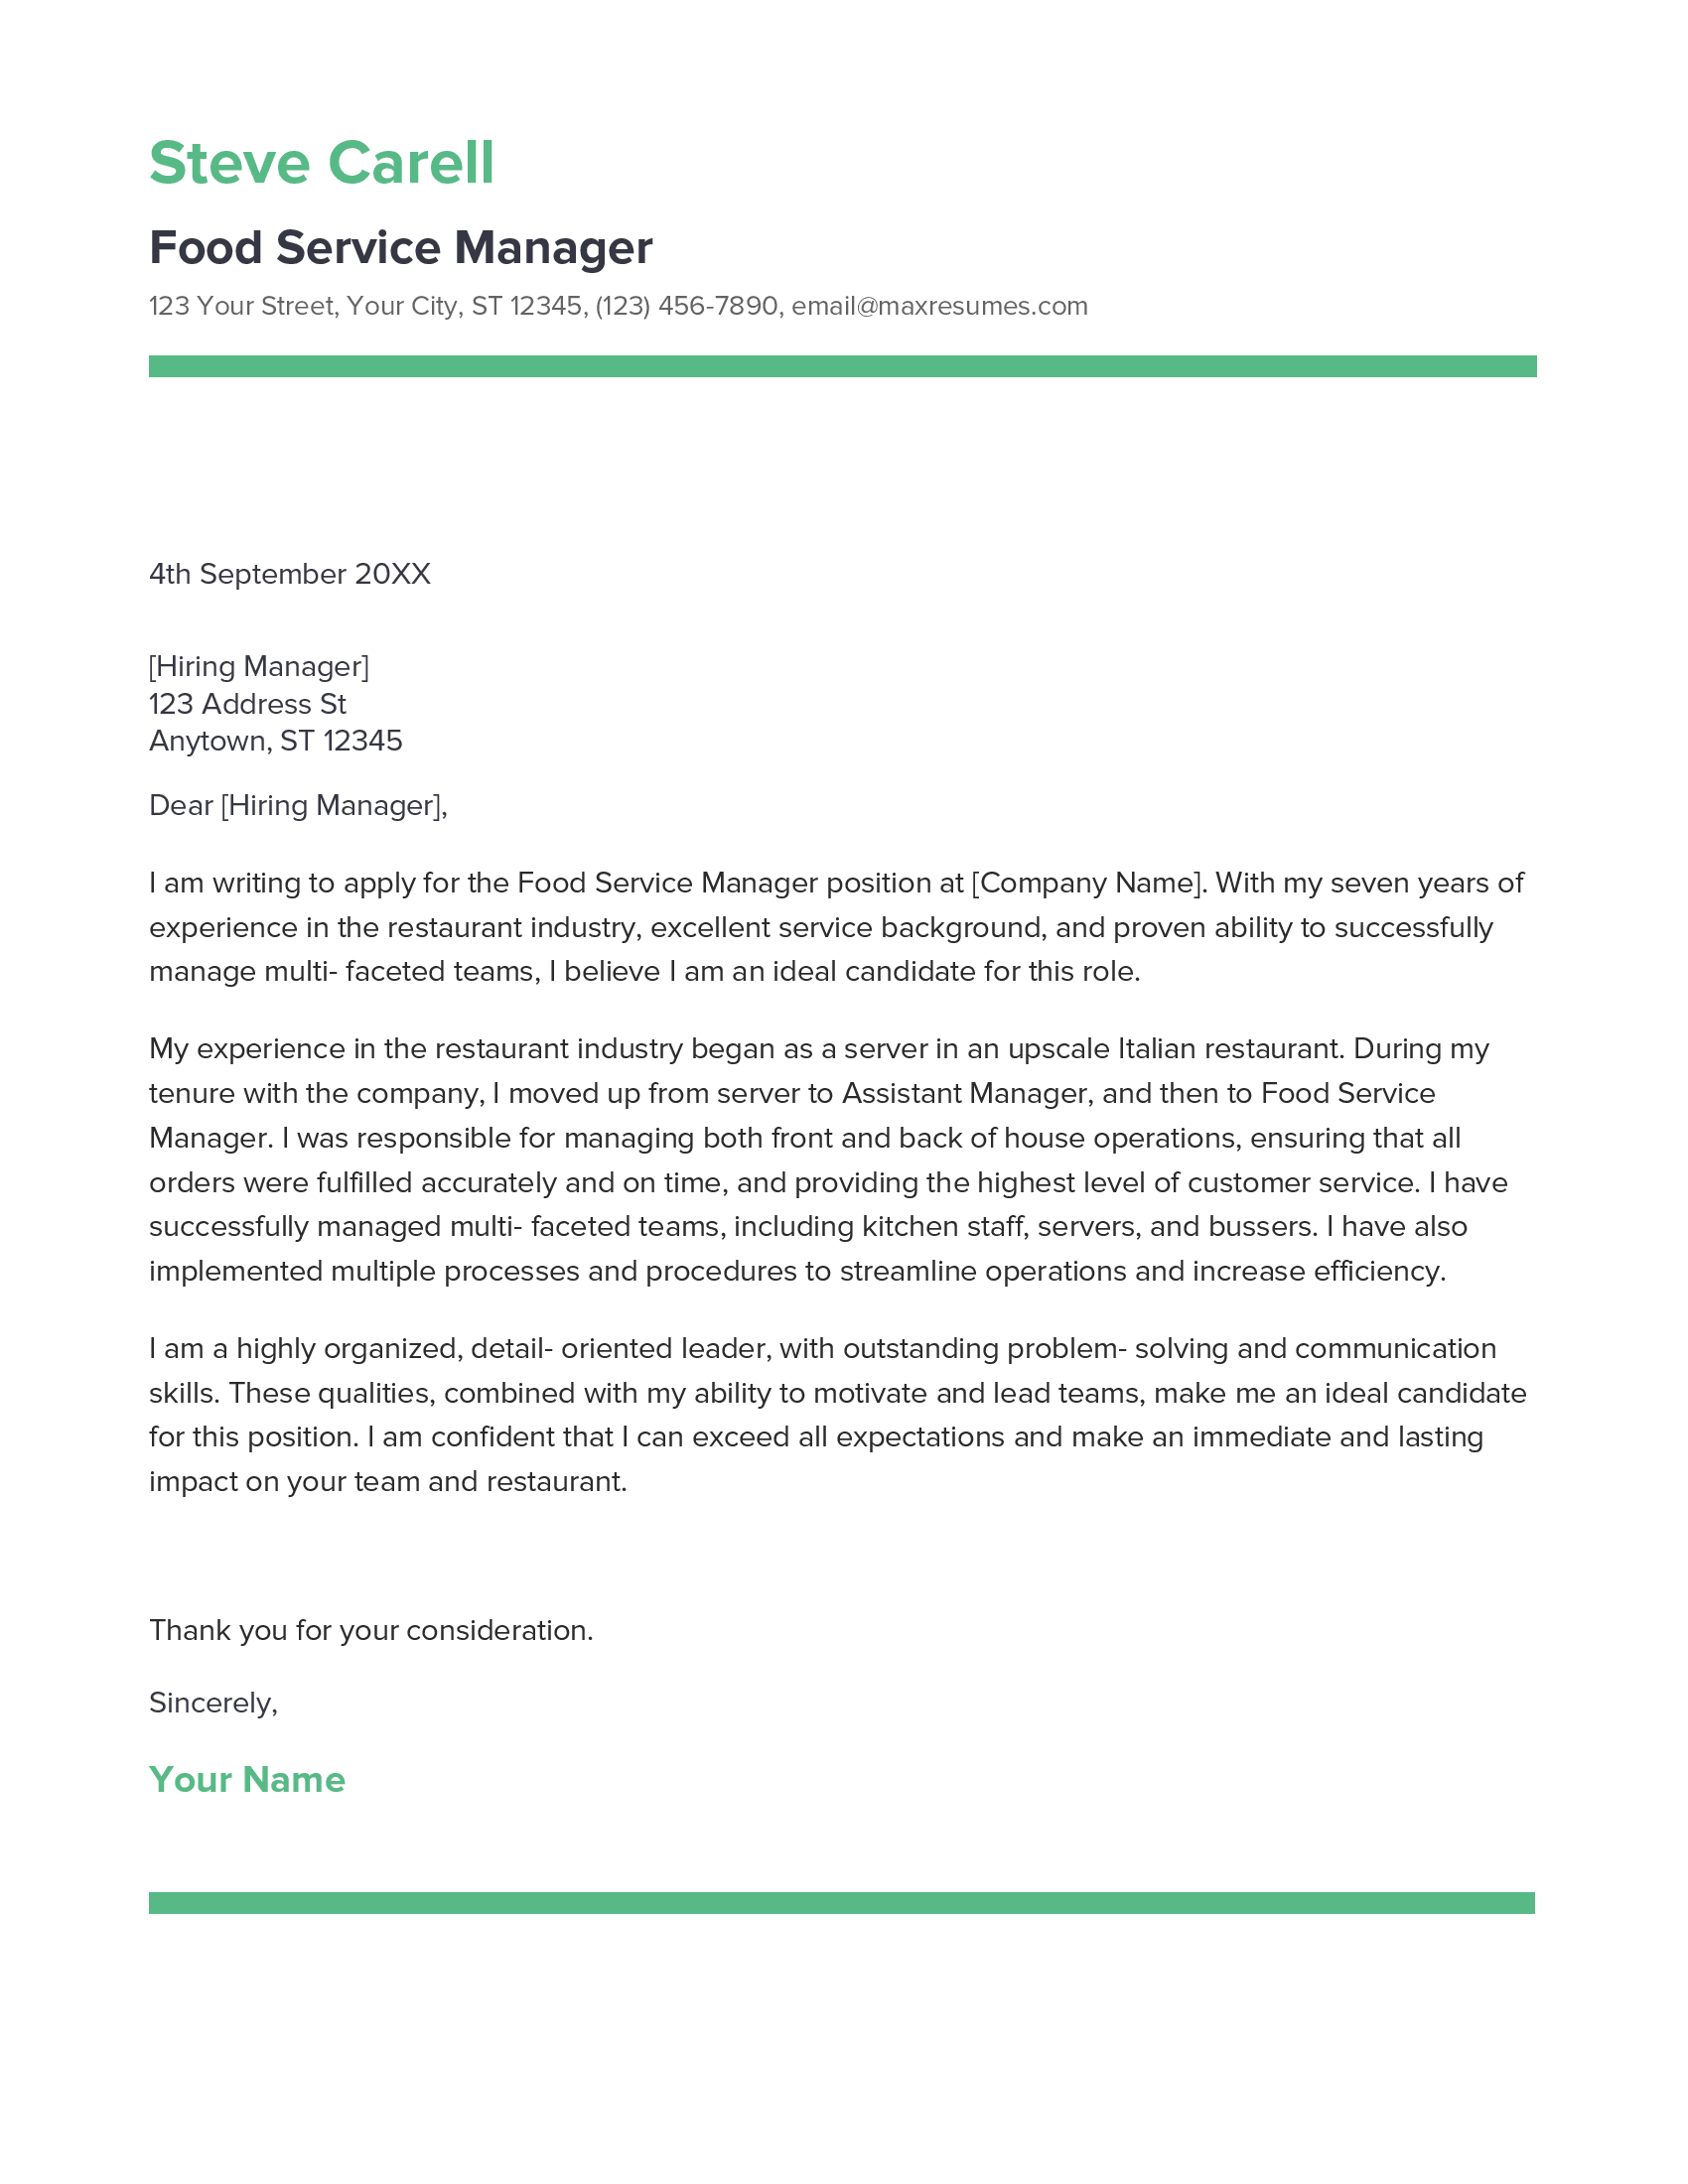 Food Service Manager Cover Letter Example